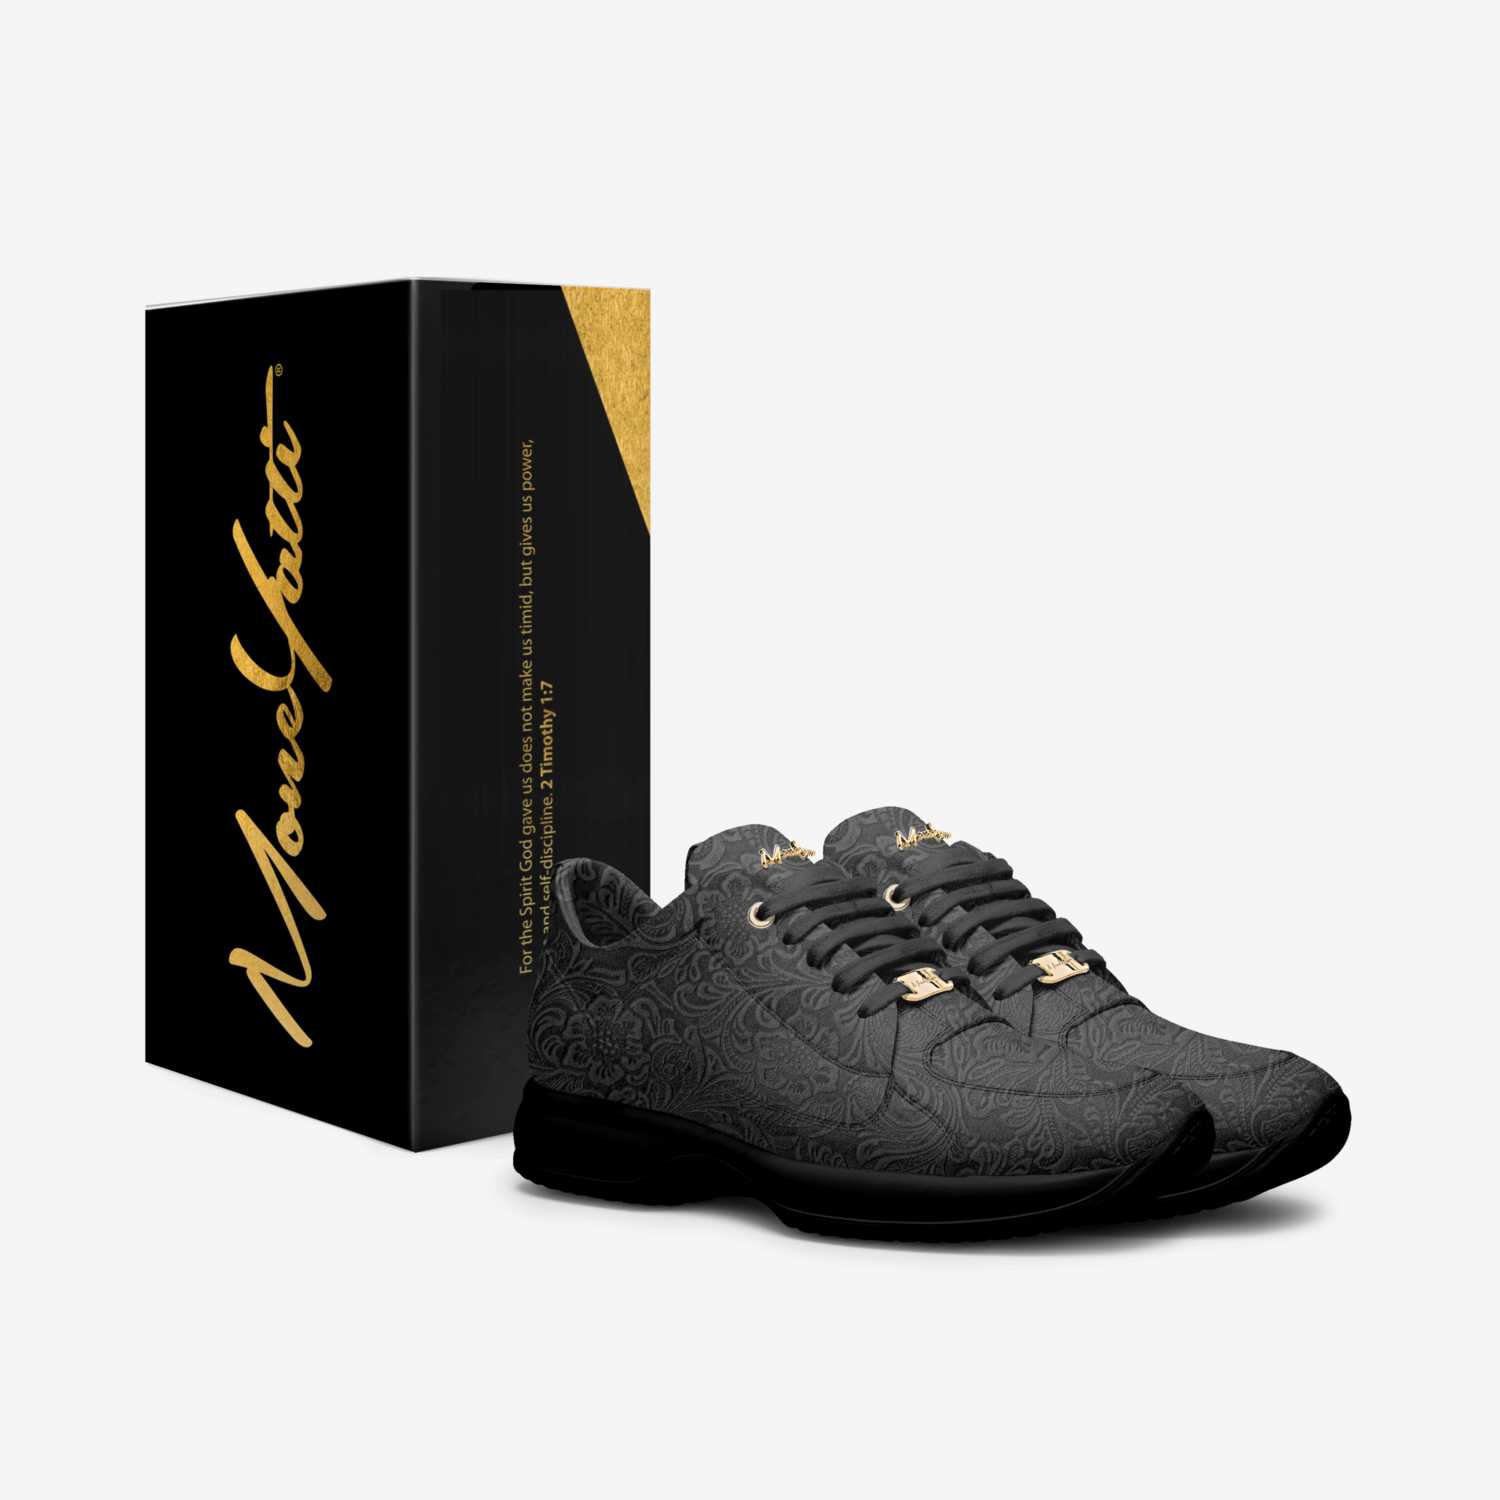 Masterpieces 061 custom made in Italy shoes by Moneyatti Brand | Box view